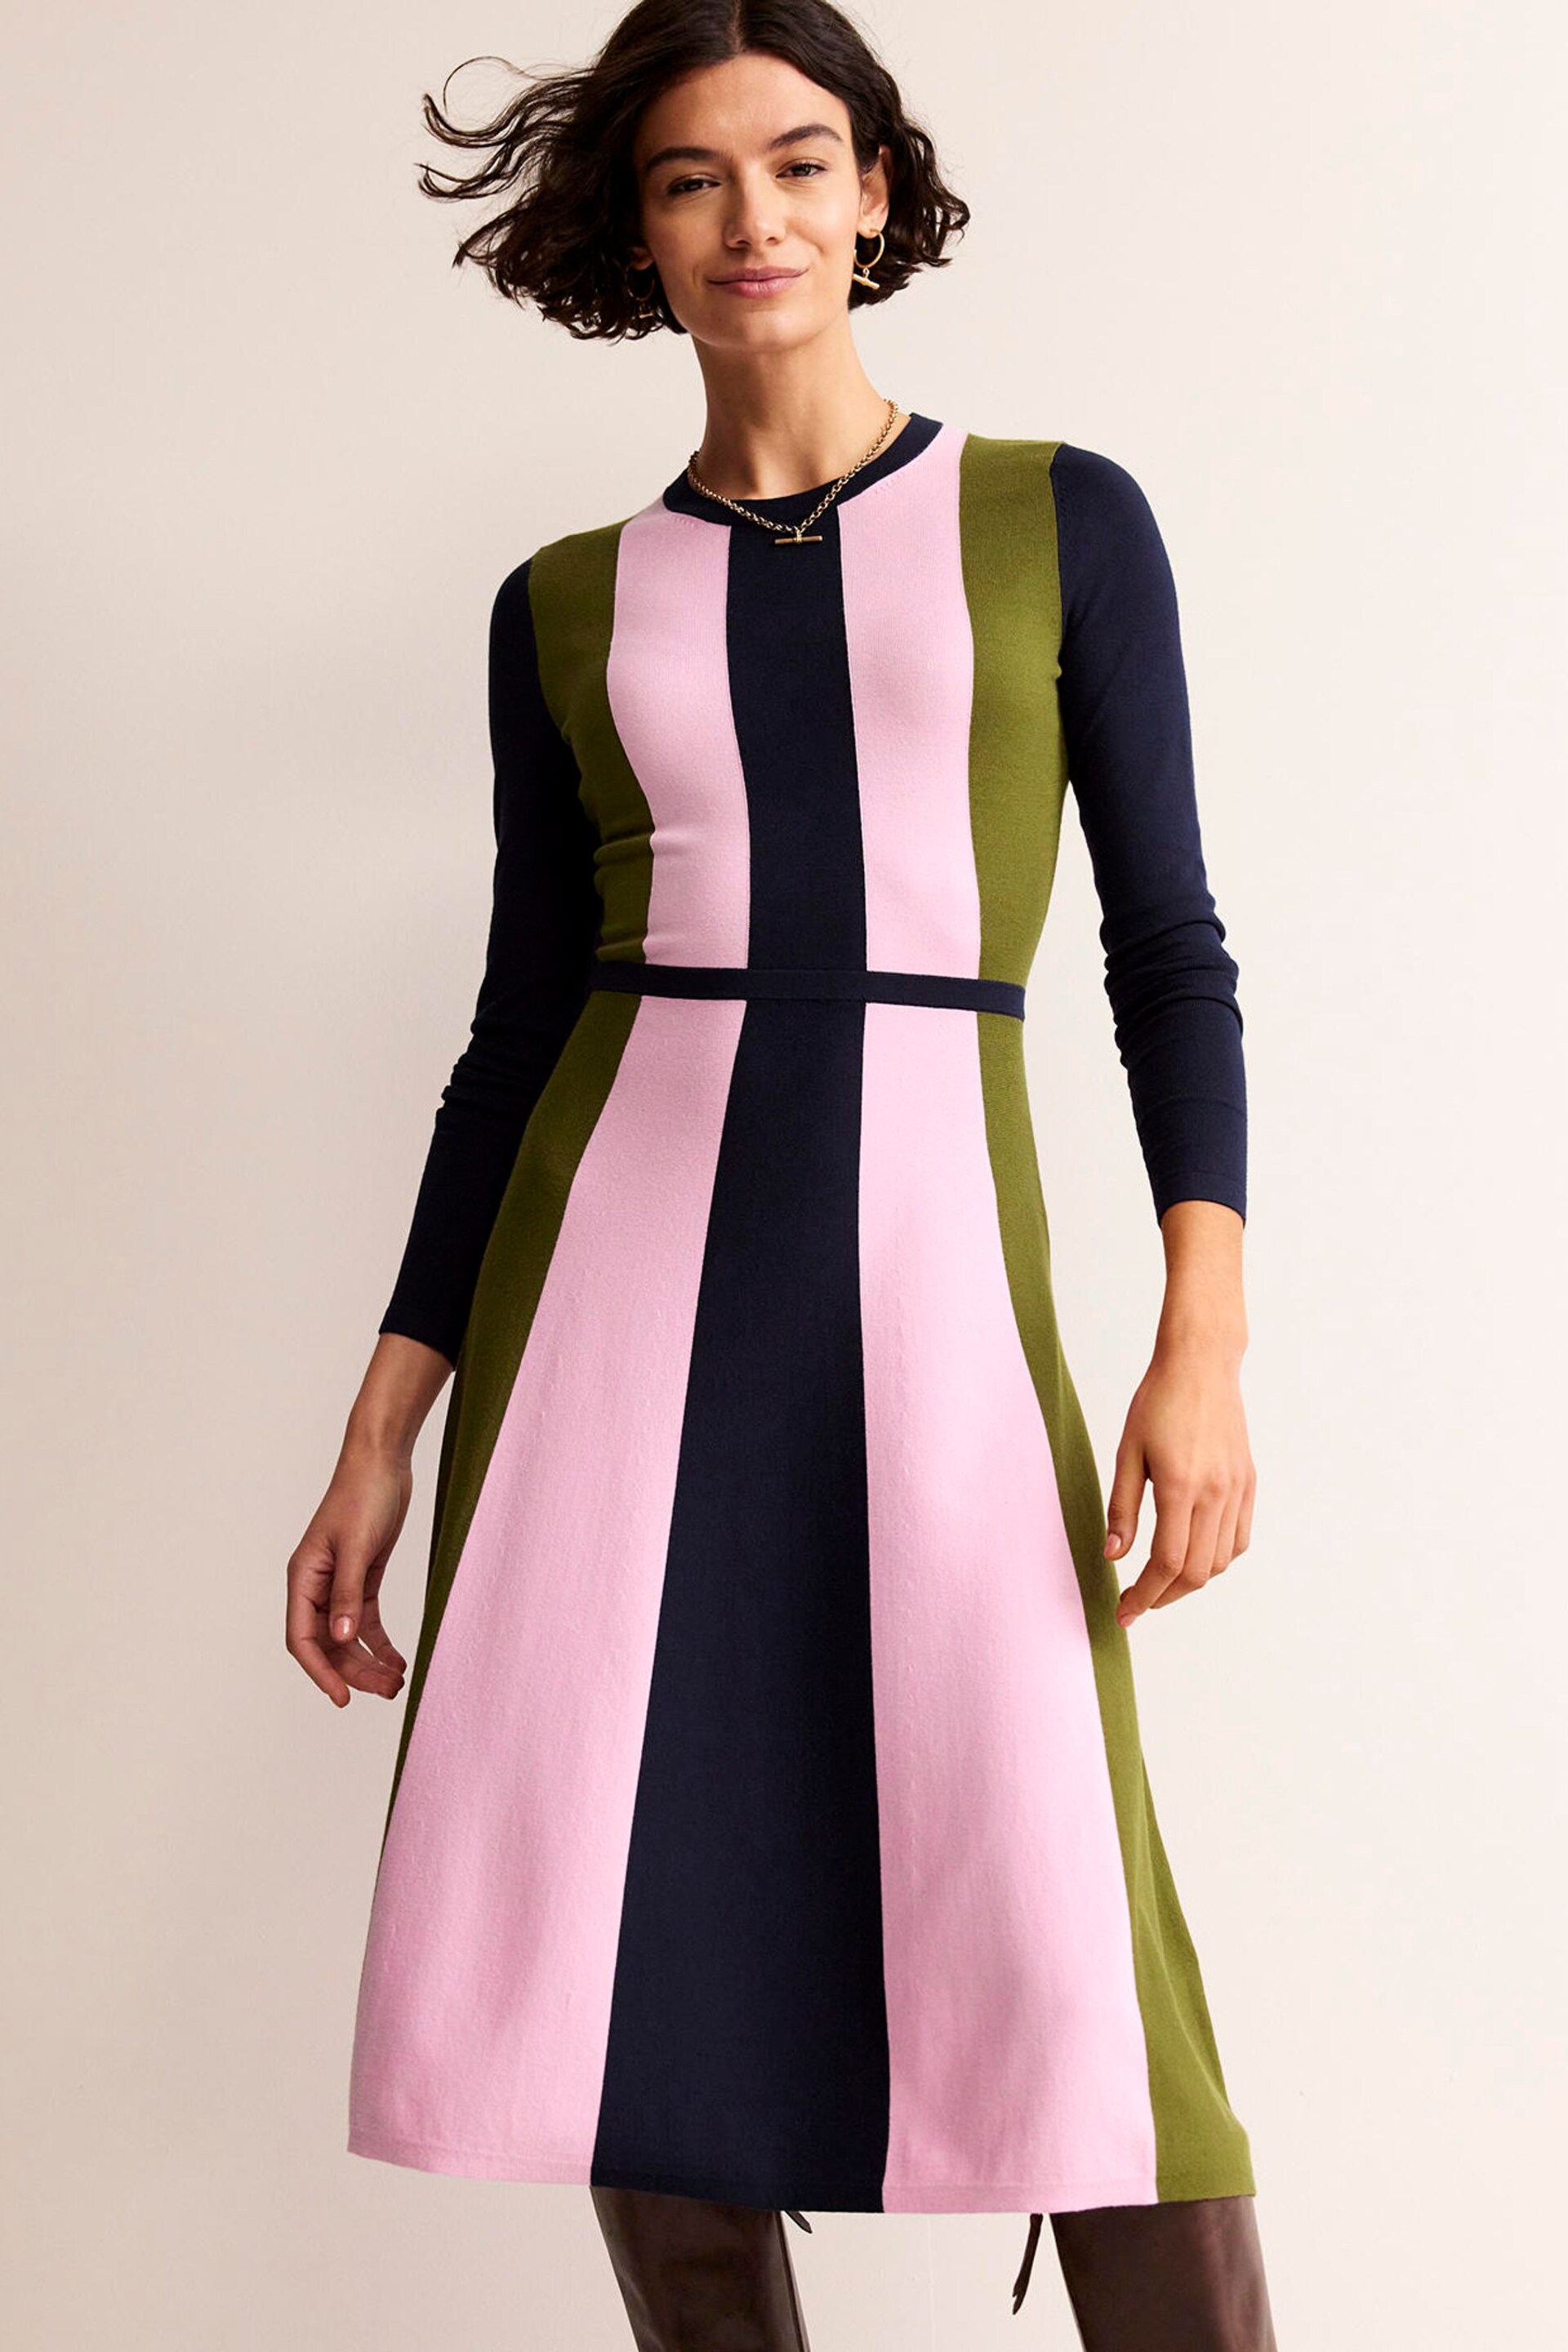 Boden Blue/Pink/Green Colour Block Knitted Dress - Image 1 of 6